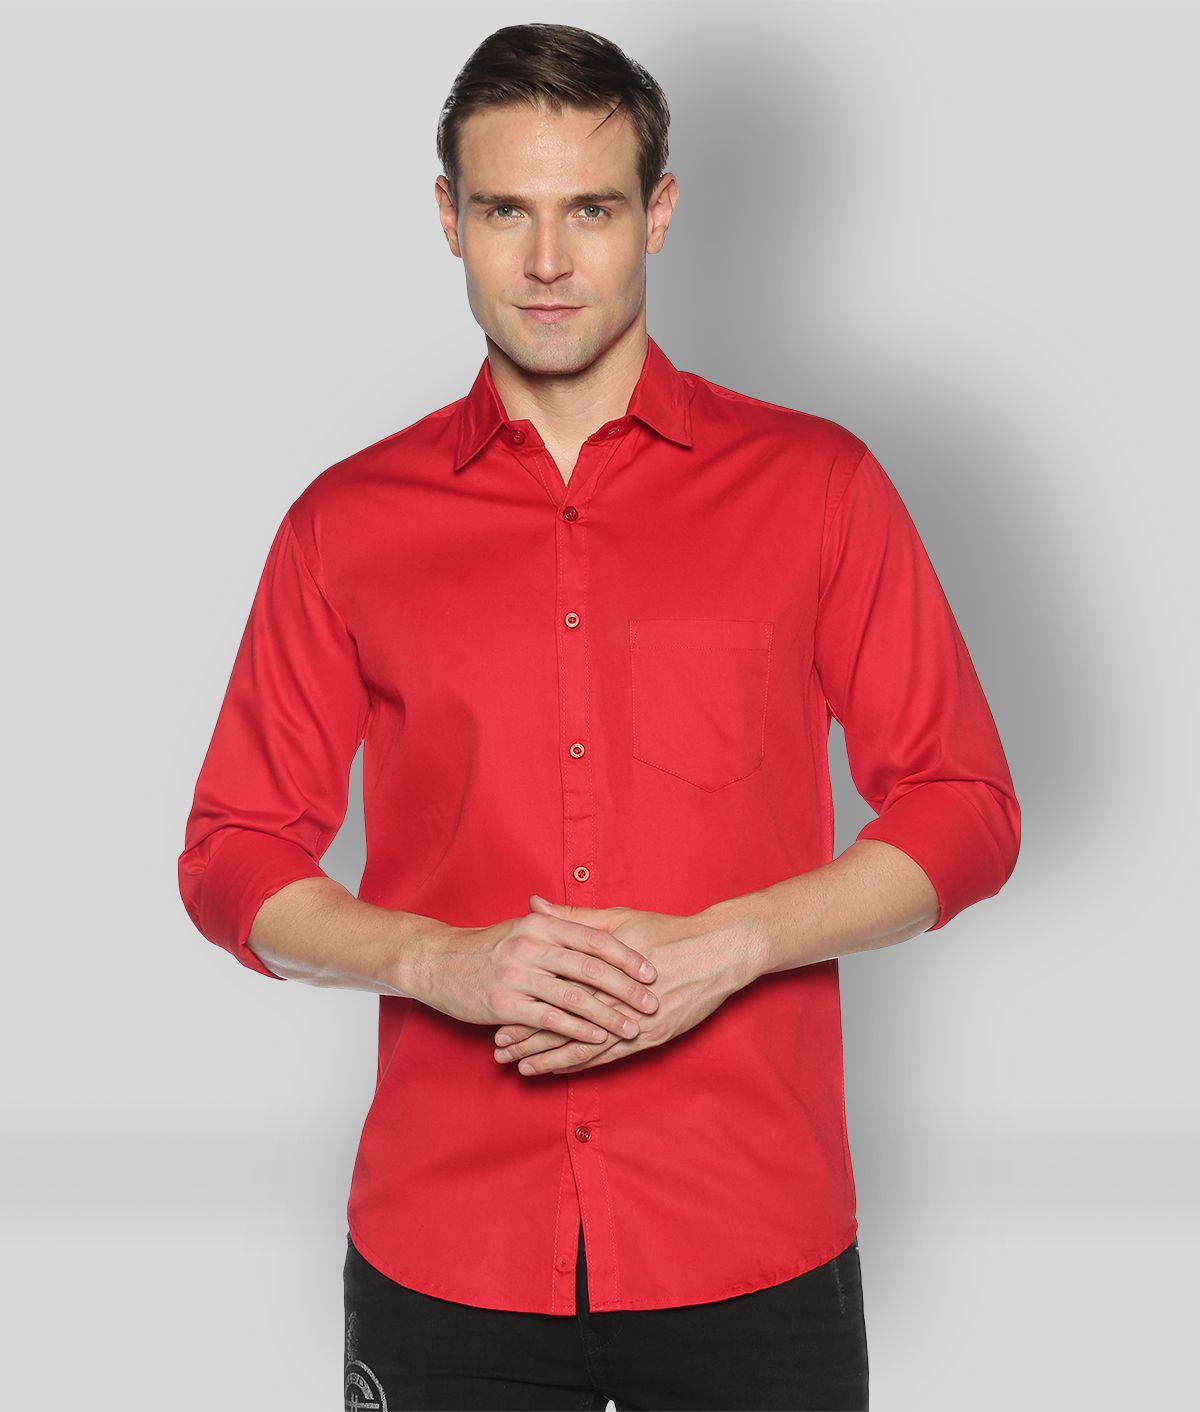 YHA - Red Cotton Regular Fit Men's Casual Shirt ( Pack of 1 )